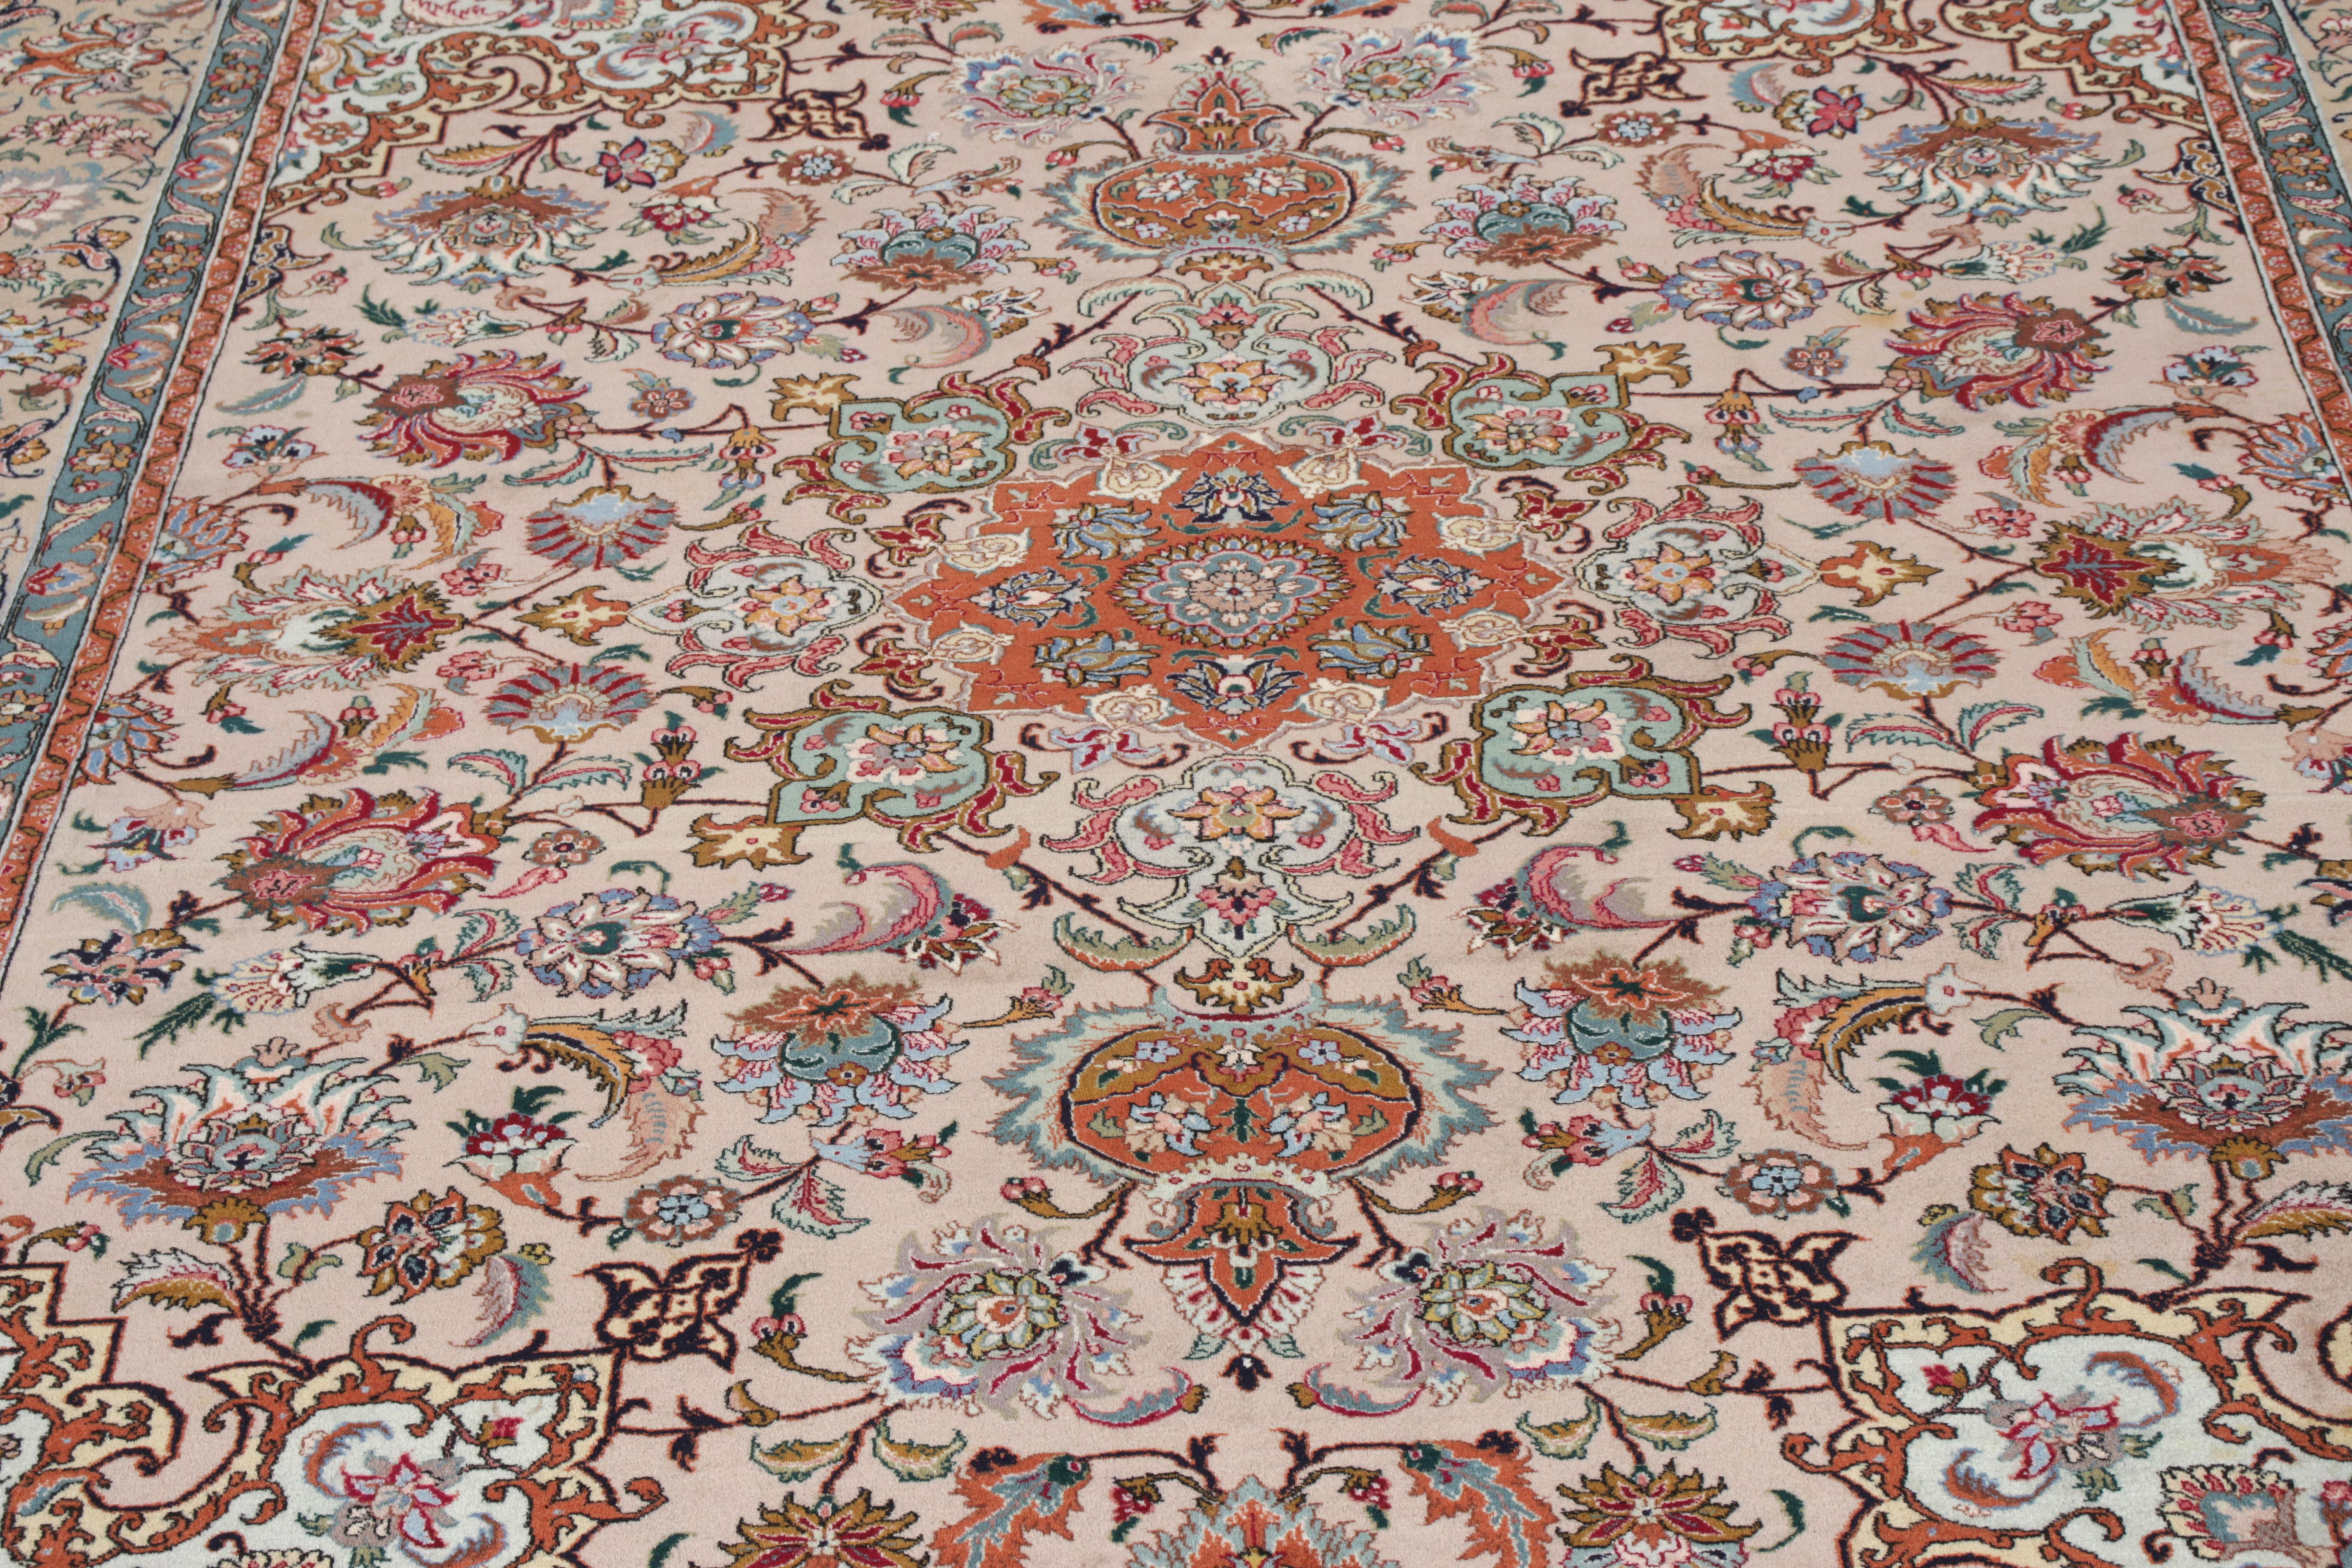 Hand-Knotted Vintage Tabriz Rug in Pink, Red Floral Patterns by Rug & Kilim In Good Condition For Sale In Long Island City, NY